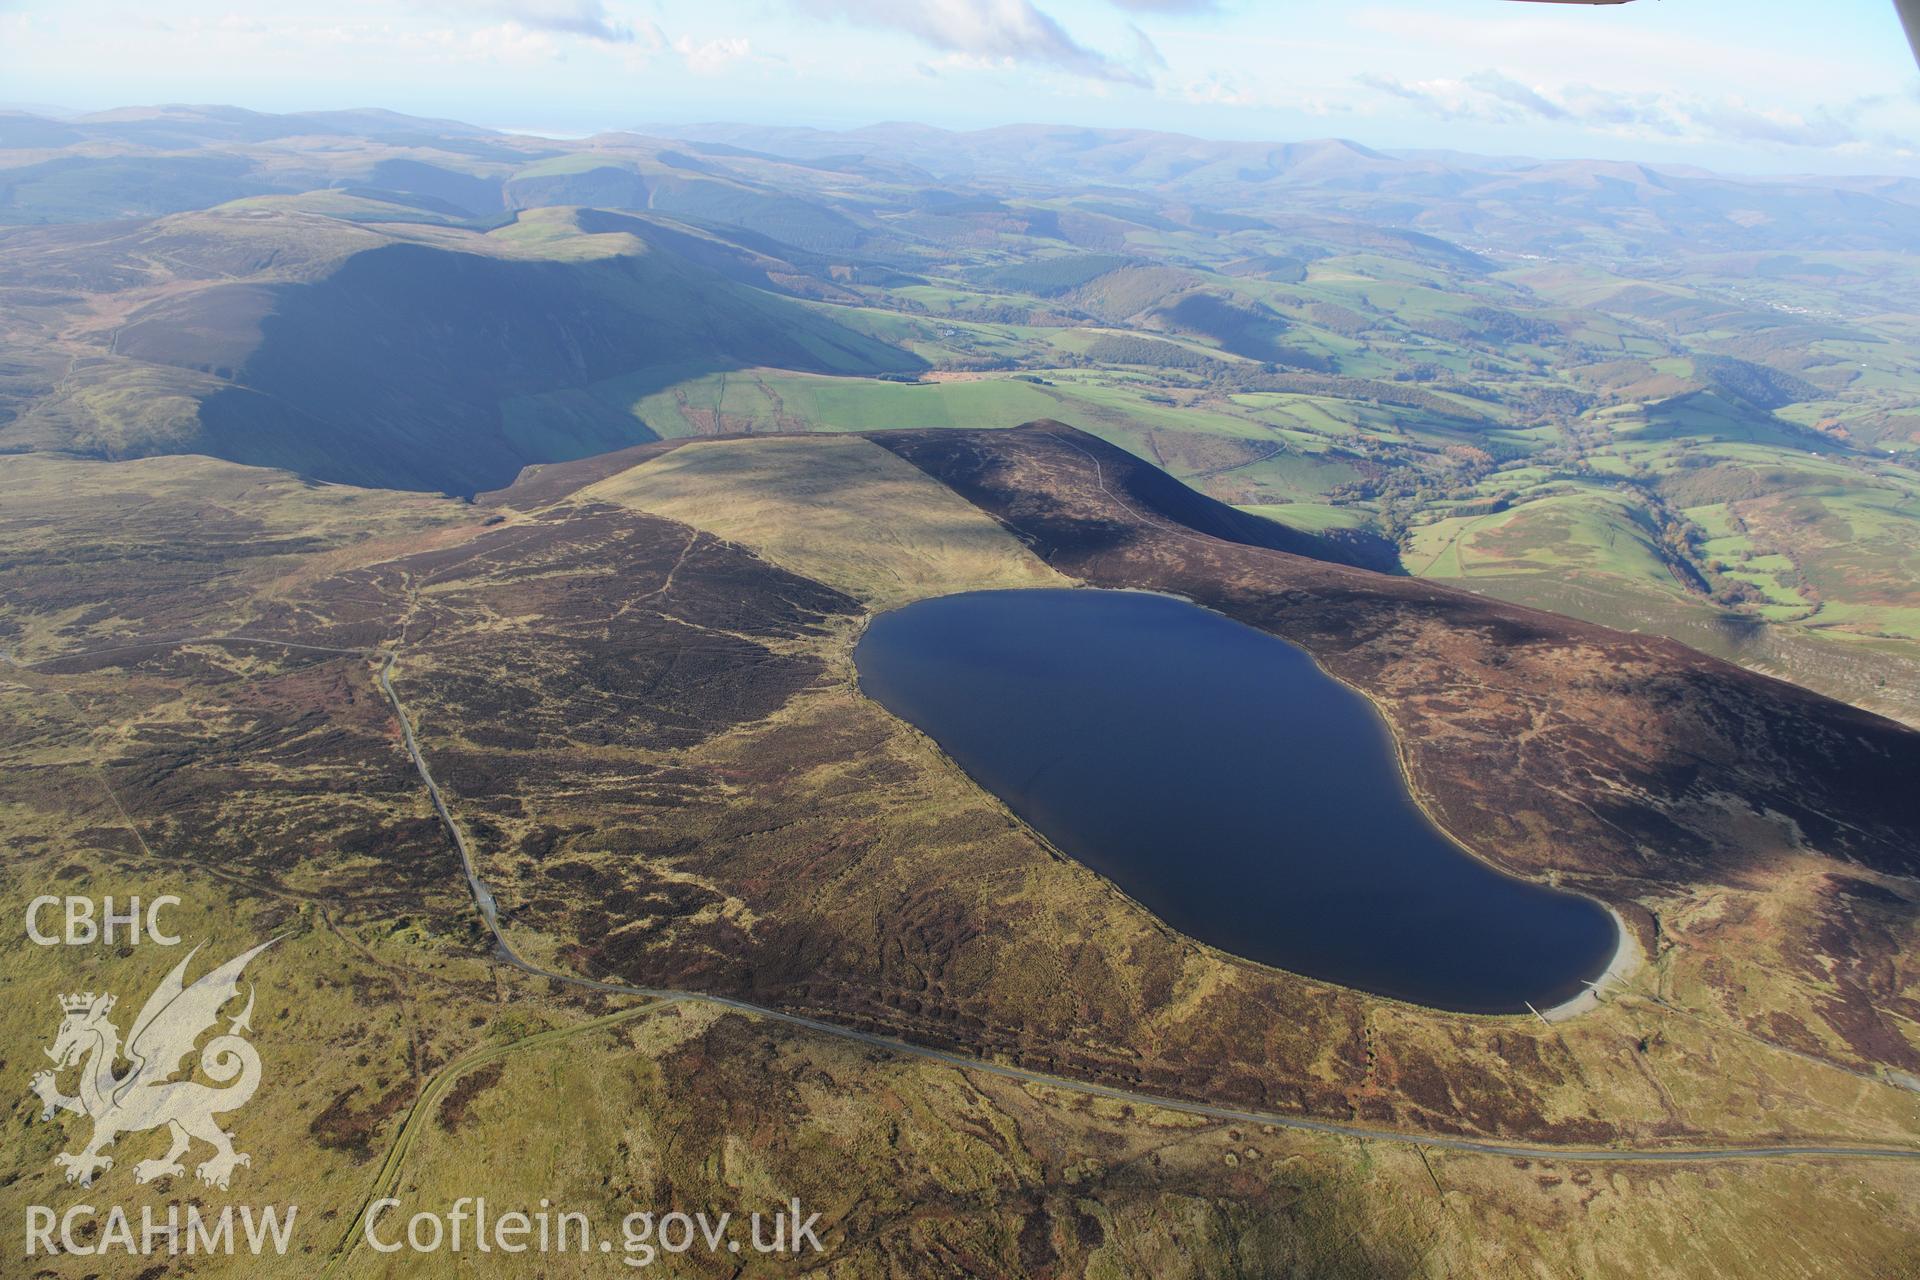 RCAHMW colour oblique photograph of Glaslyn Lake, view from south-east. Taken by Toby Driver on 05/11/2012.